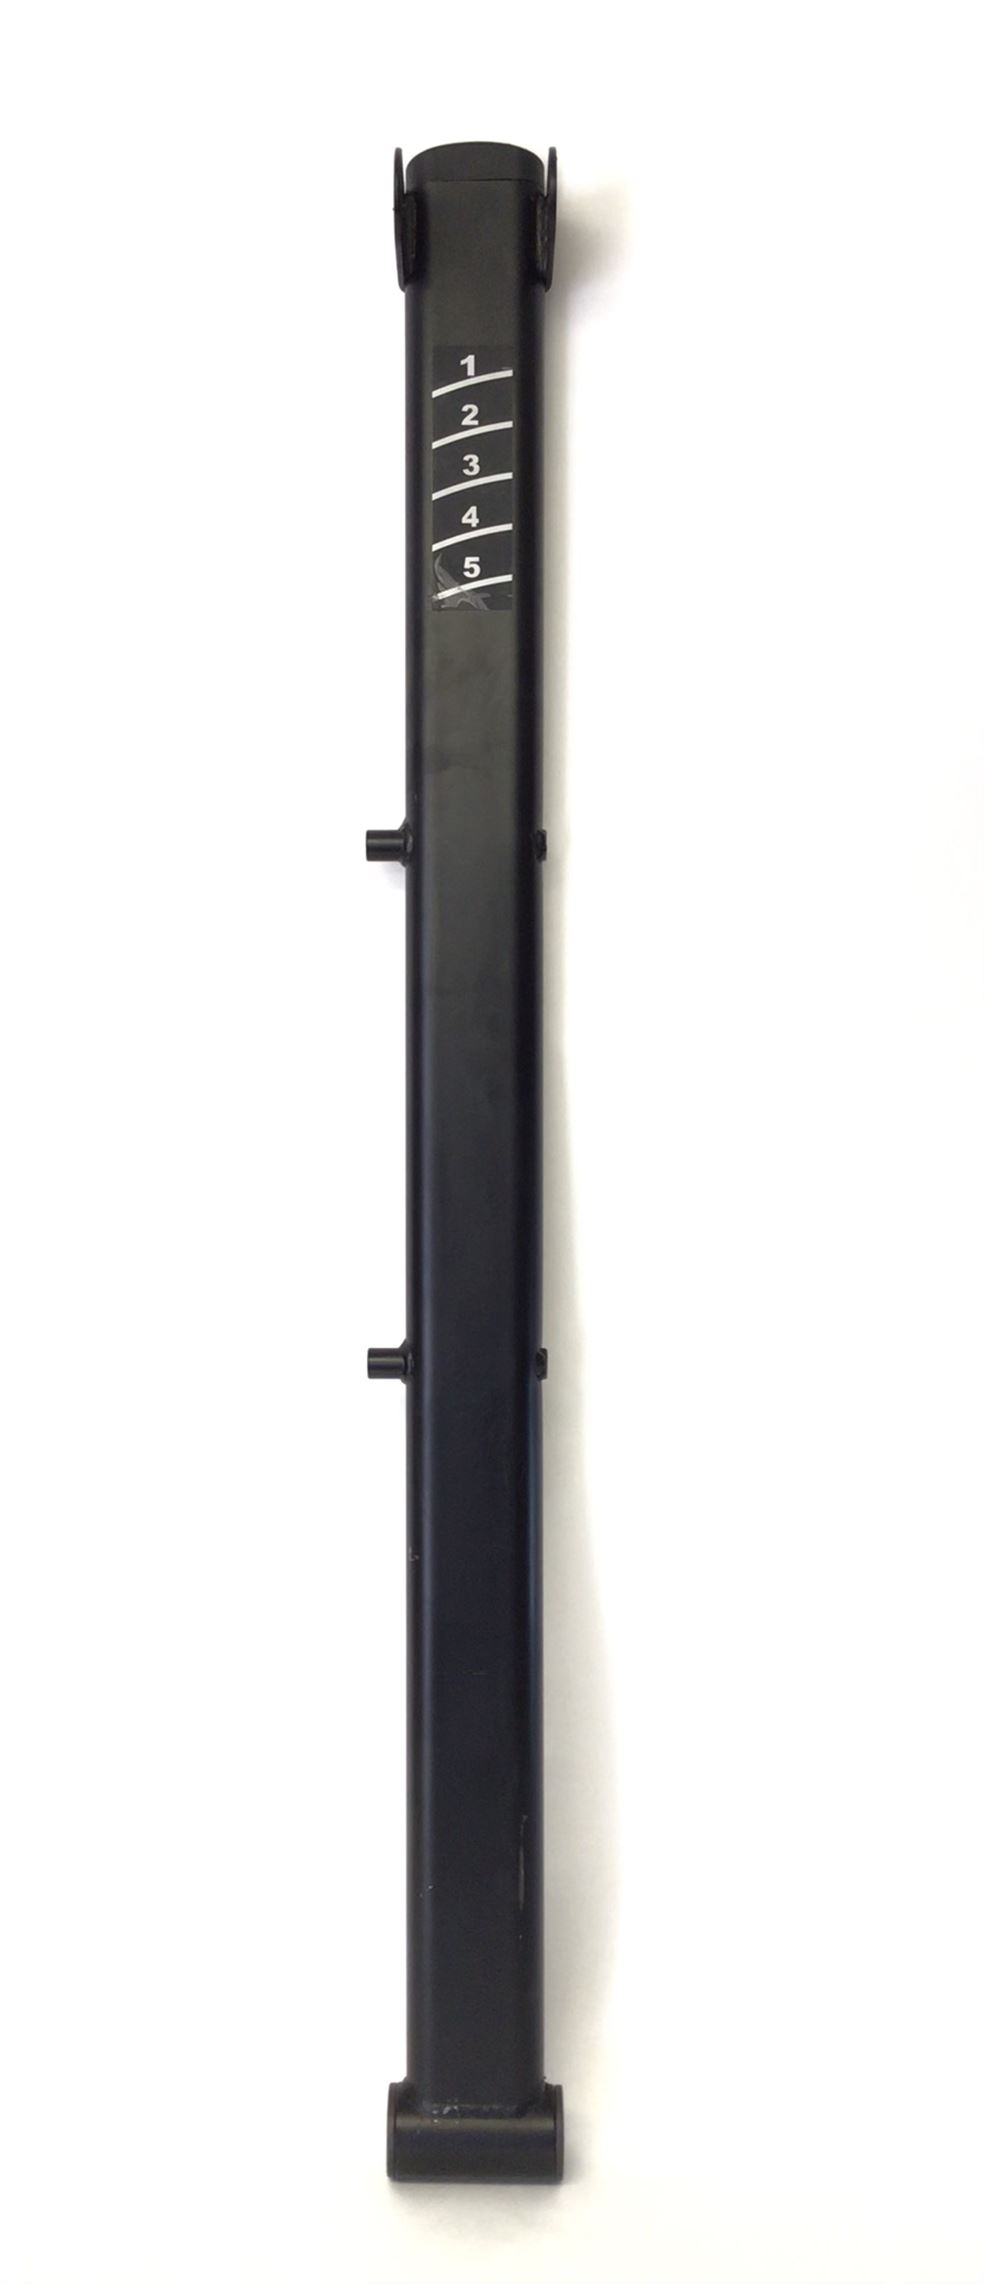 Left Foot Pedal Arm (Used)